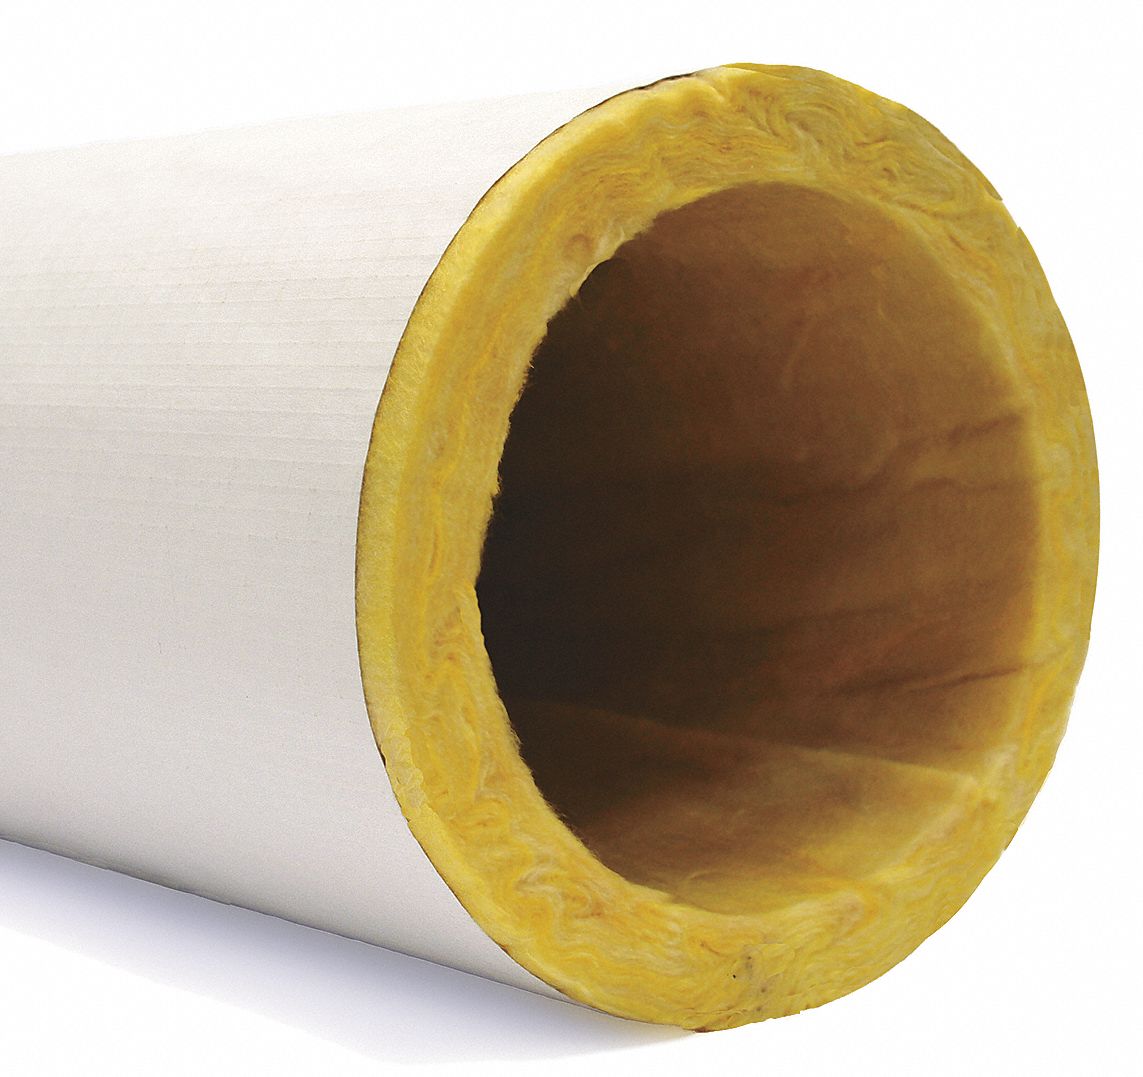 Reliable and Woven Waterproof Pipe Insulation 